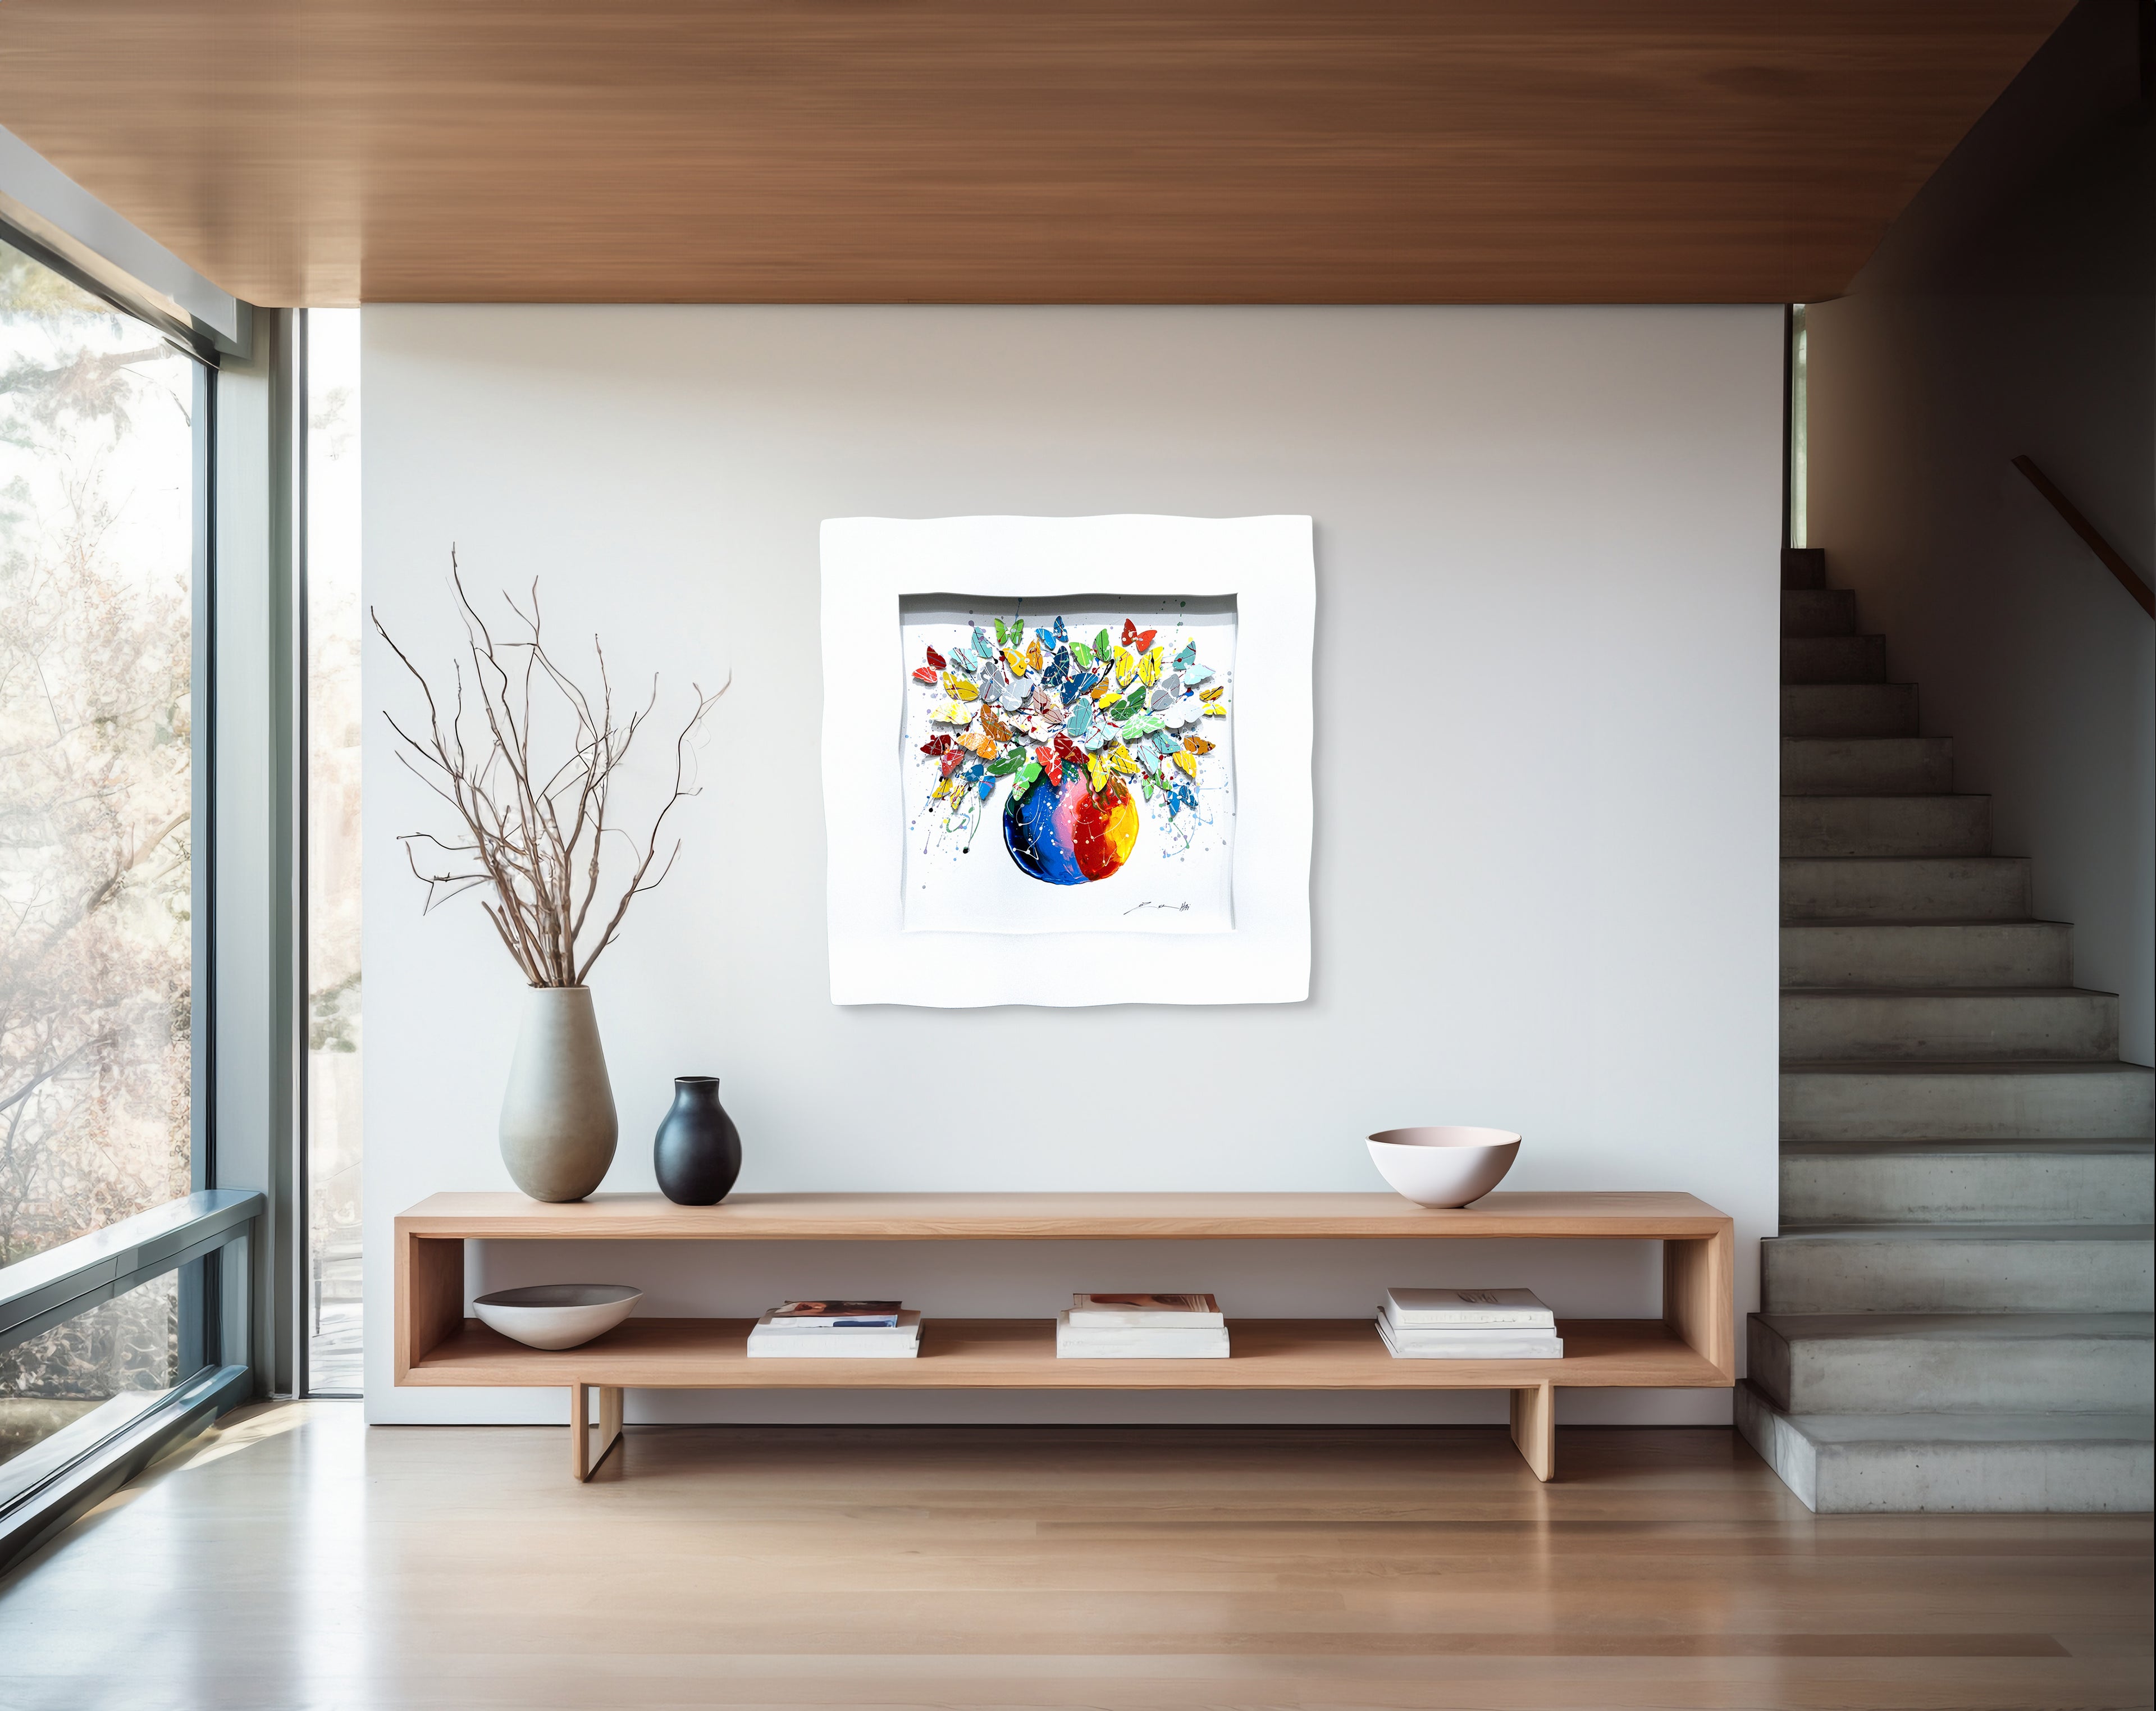 Framed Butterfly Bowl artwork hanged on a wall in a home niche